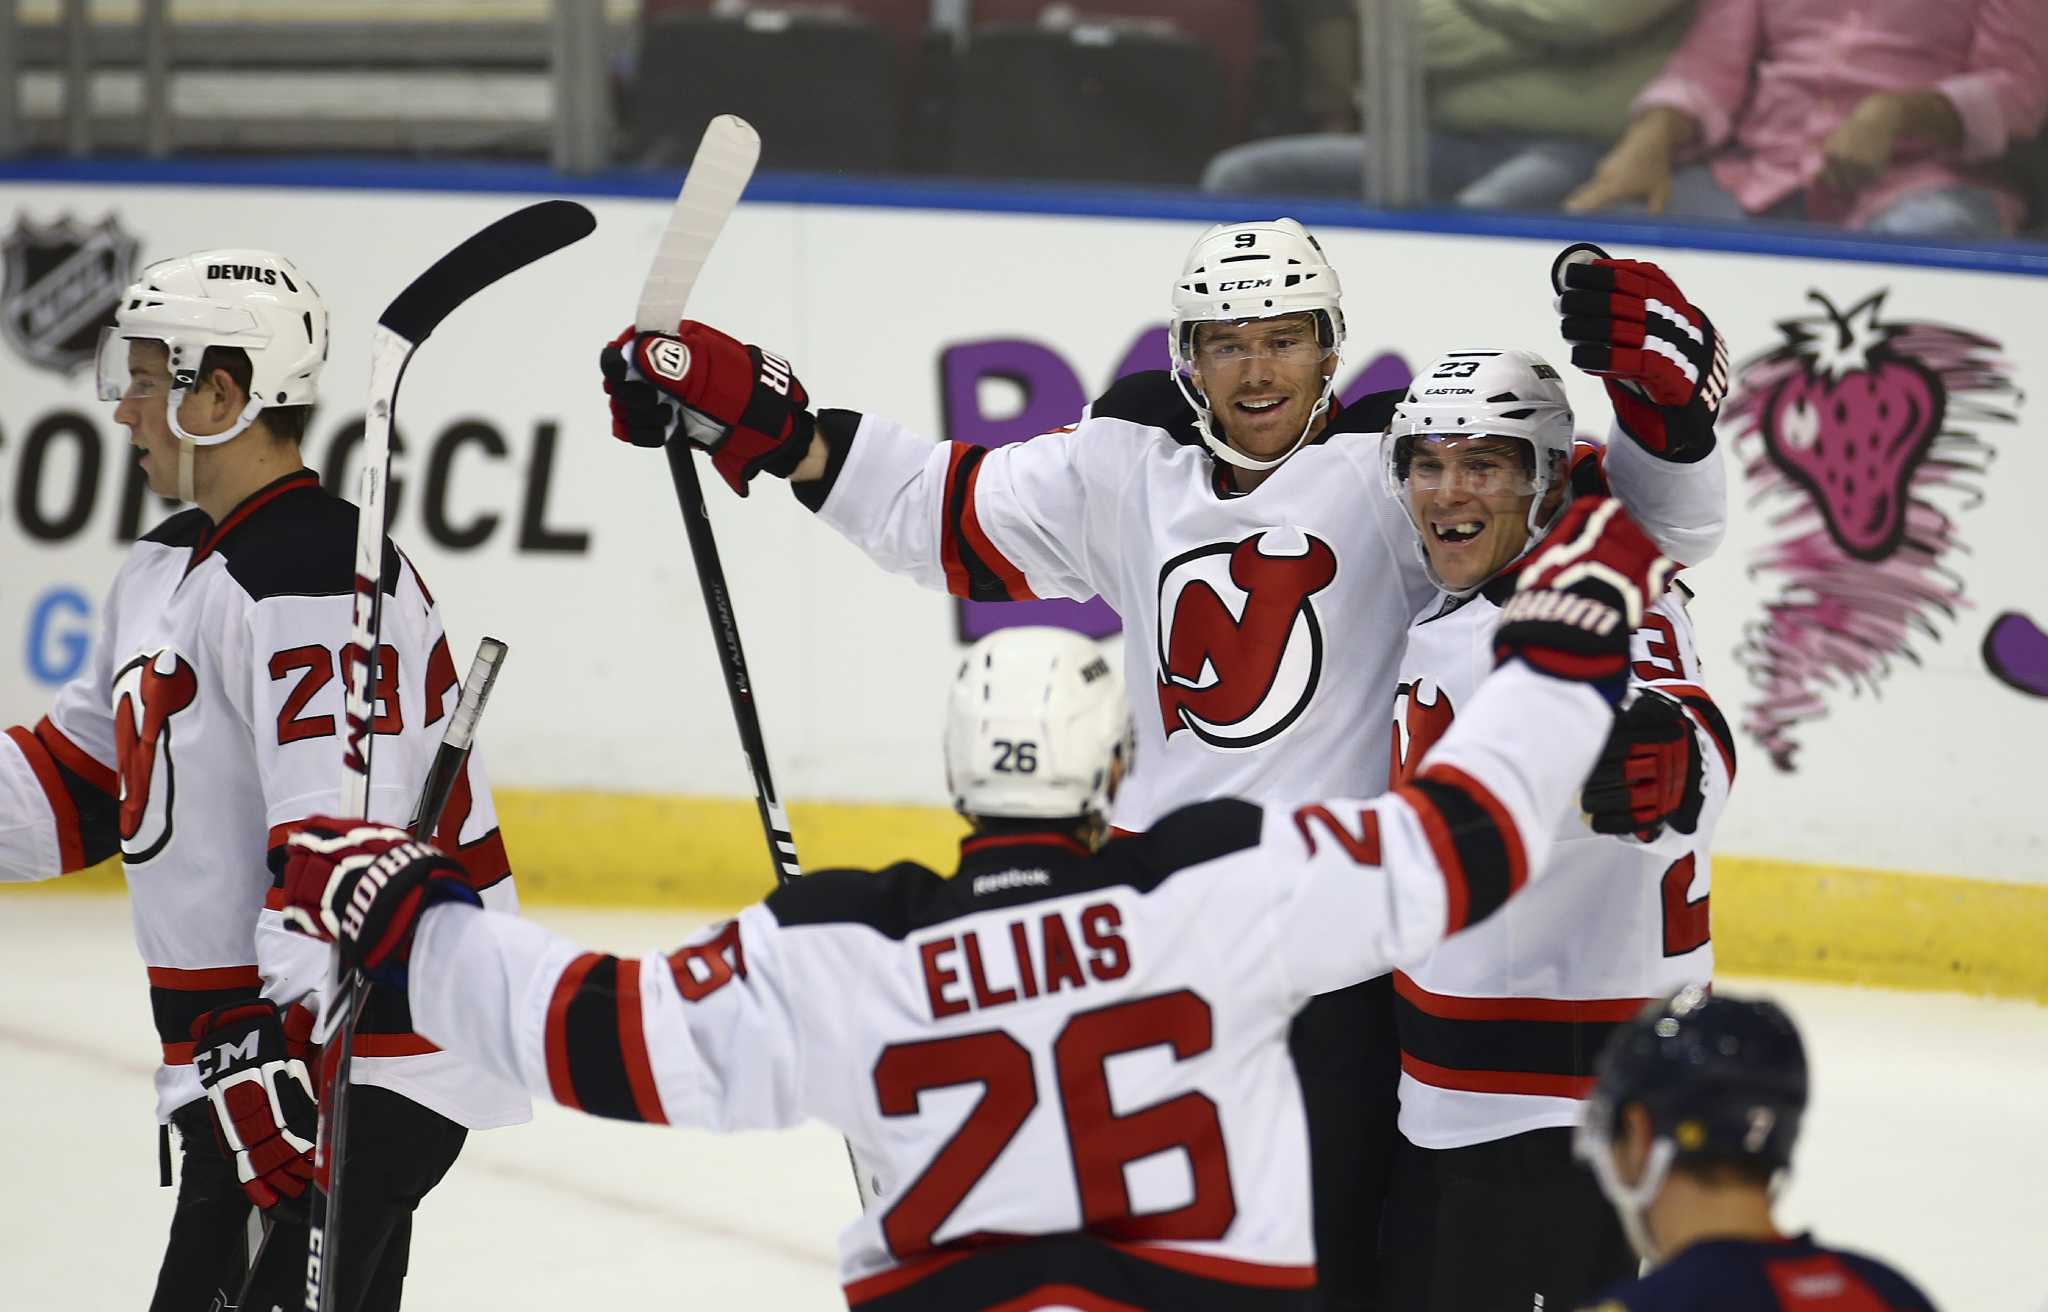 Nelson scores 2 to lead Islanders to 6-4 win over Devils